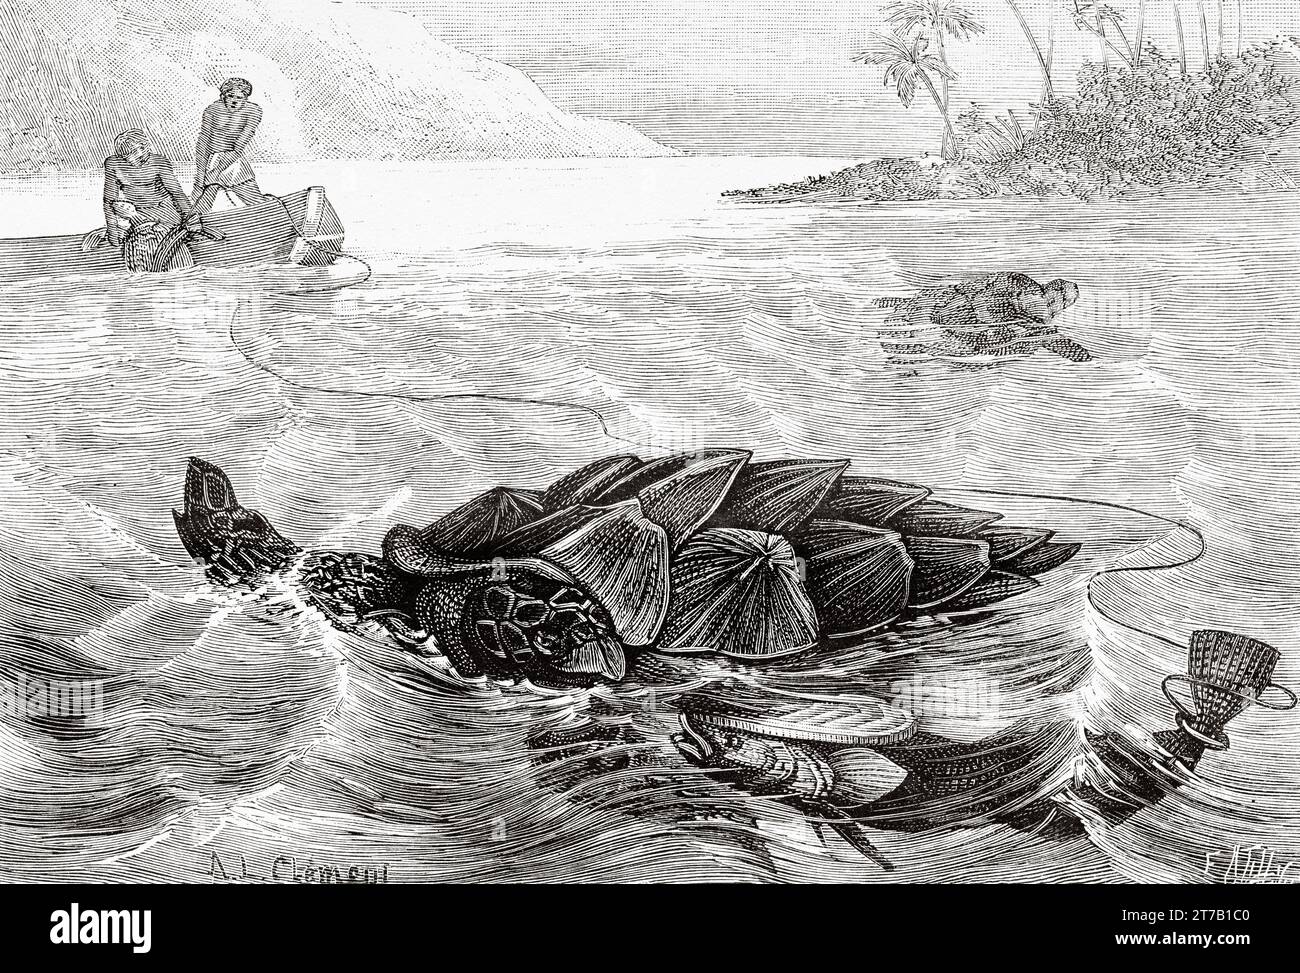 Traditional technique of turtle fishing using a remora fish. Old illustration from La Nature 1887 Stock Photo